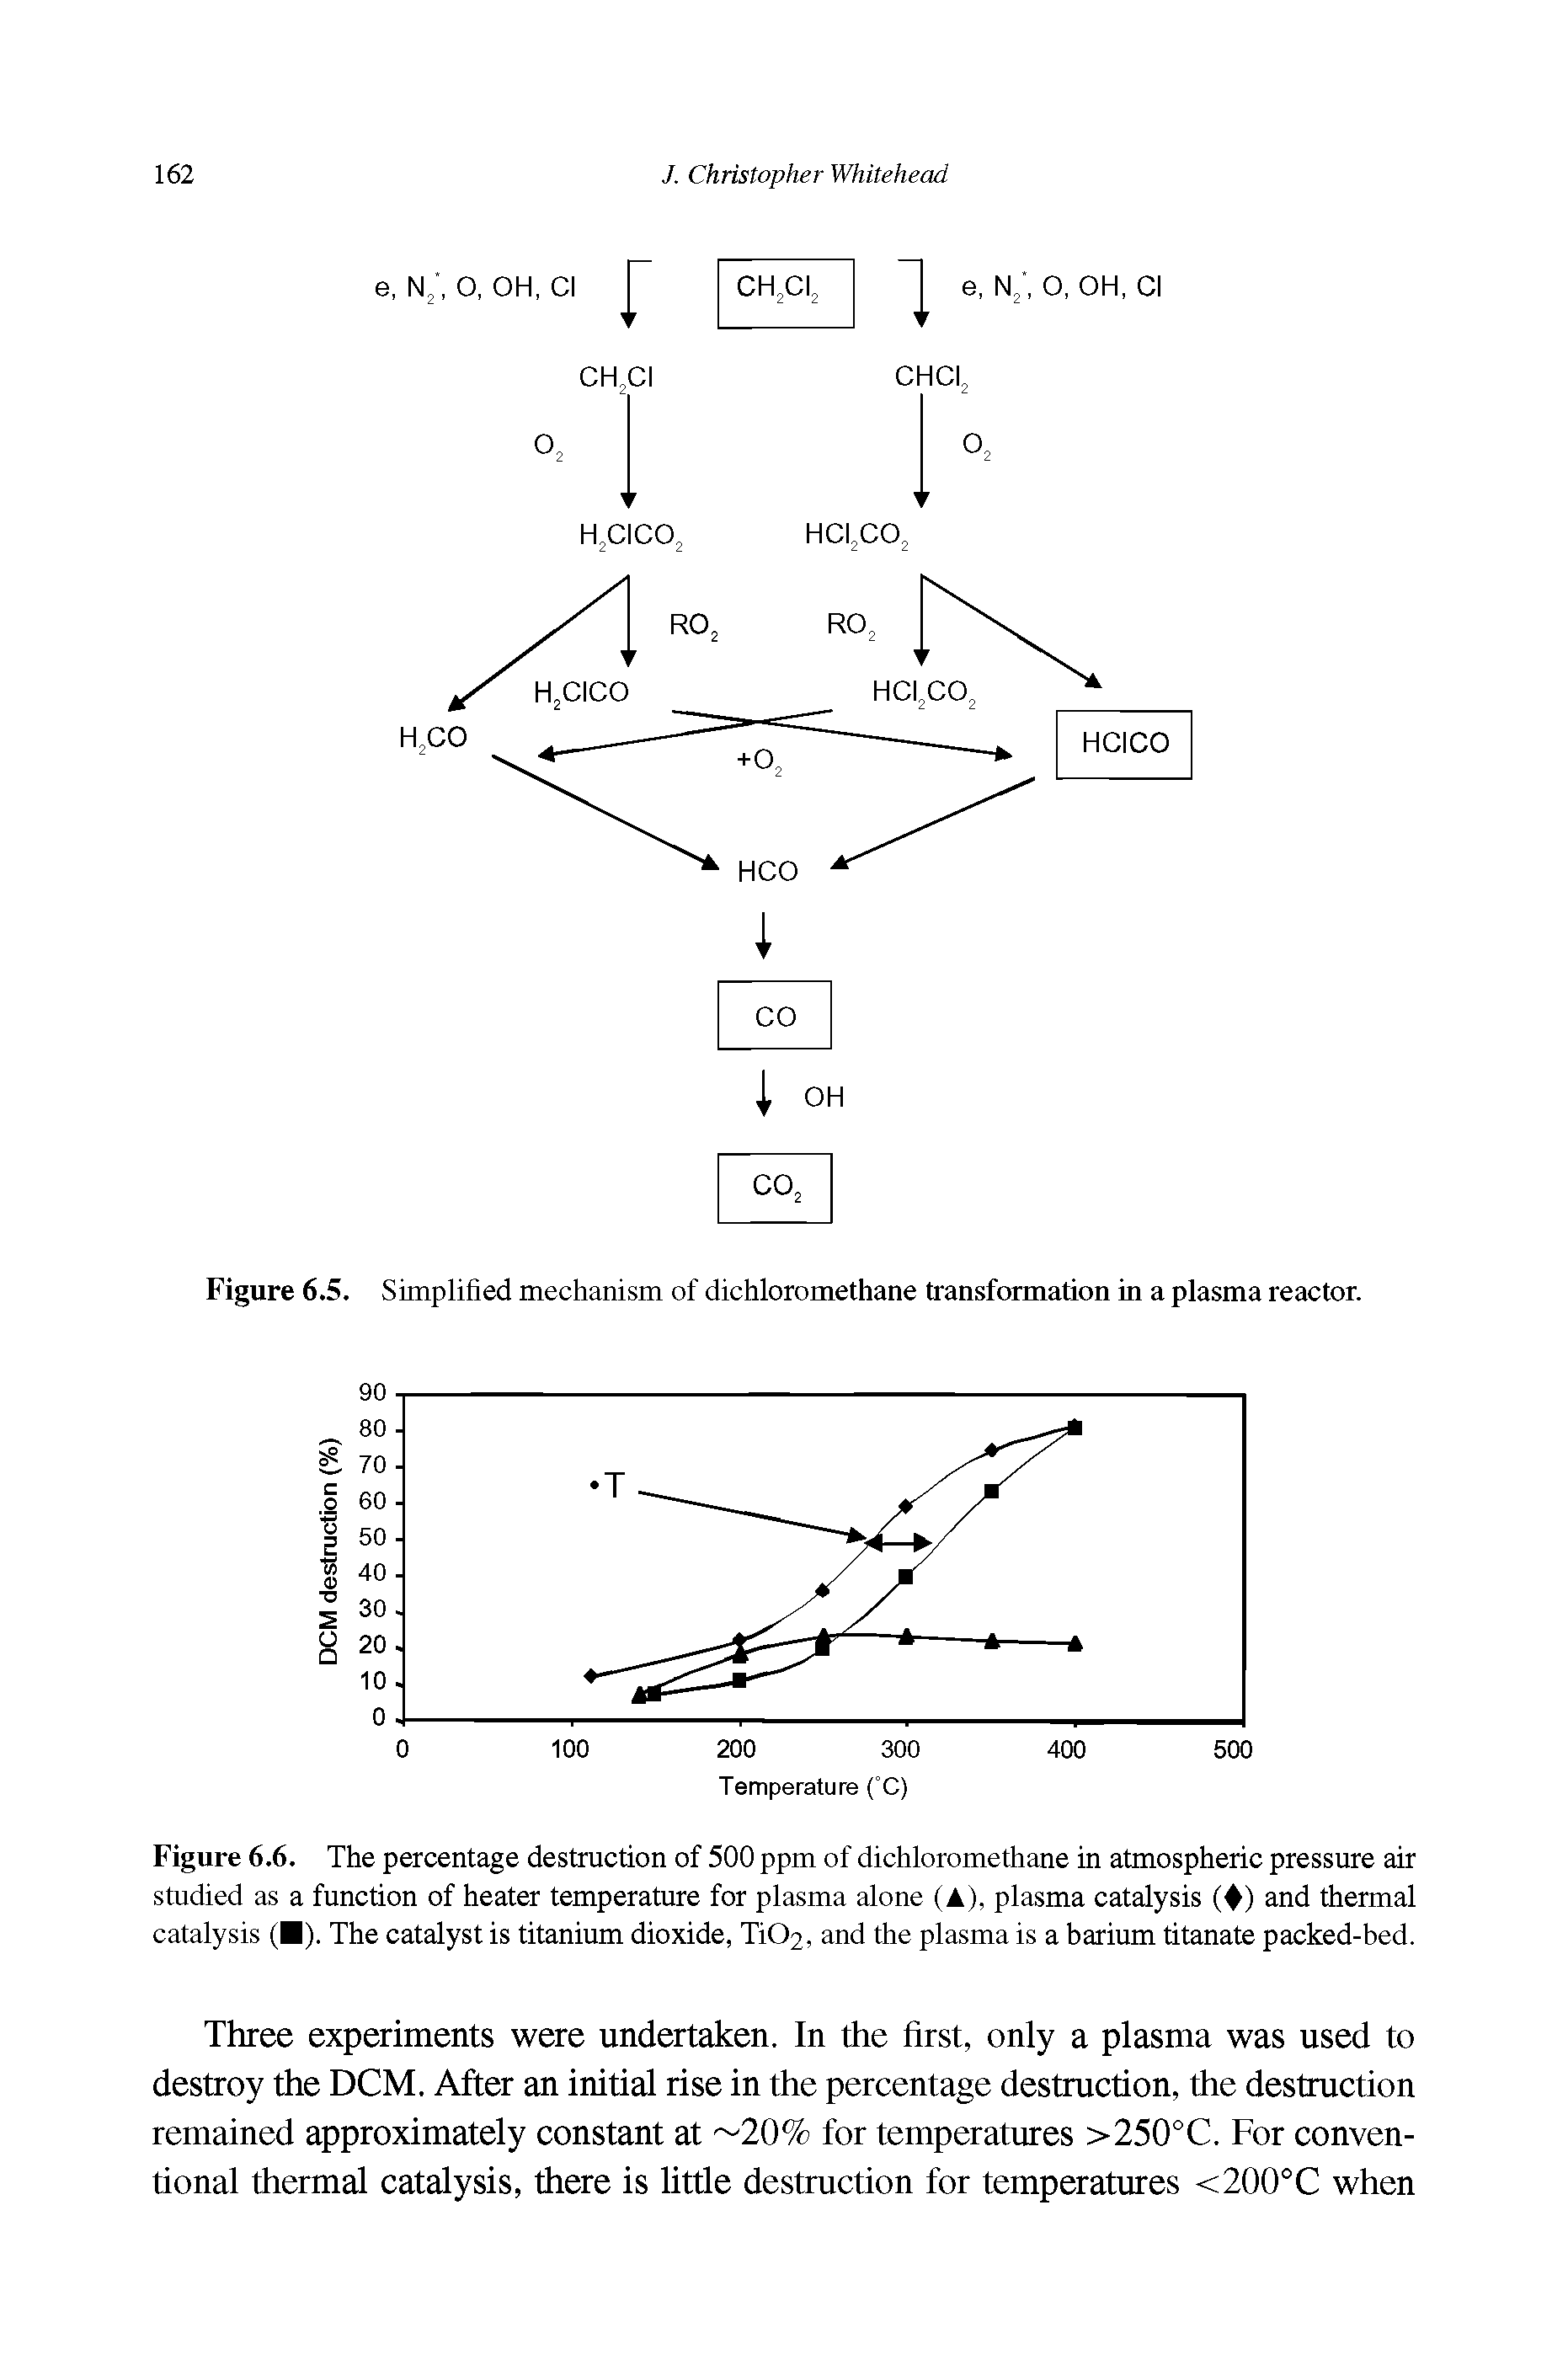 Figure 6.6. The percentage destruction of 500 ppm of dichloromethane in atmospheric pressure air studied as a function of heater temperature for plasma alone (A), plasma catalysis ( ) and thermal catalysis ( ), The catalyst is titanium dioxide, Ti02, and the plasma is a barium titanate packed-bed.